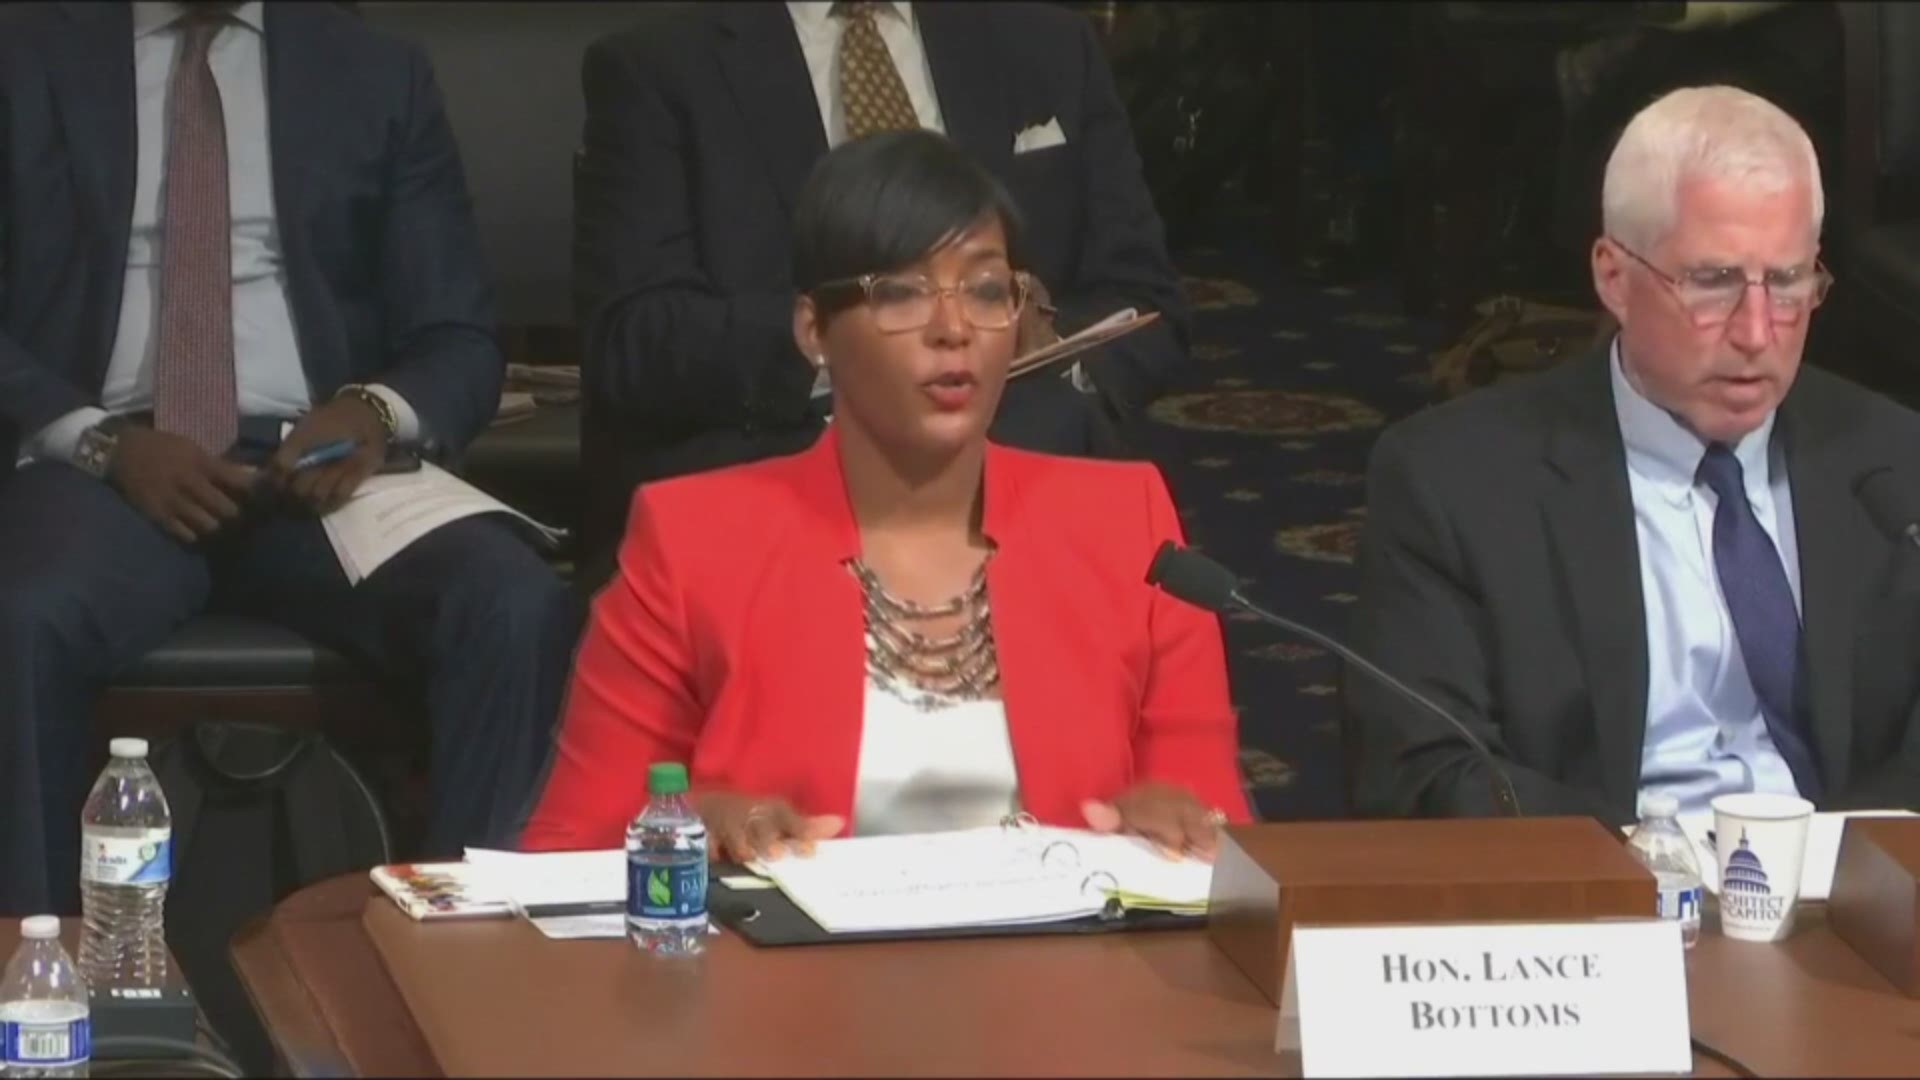 Atlanta Mayor Keisha Lance Bottoms testified about the 2018 Atlanta cyberattack before the House Committee on Cybersecurity in Washington on Tuesday afternoon.